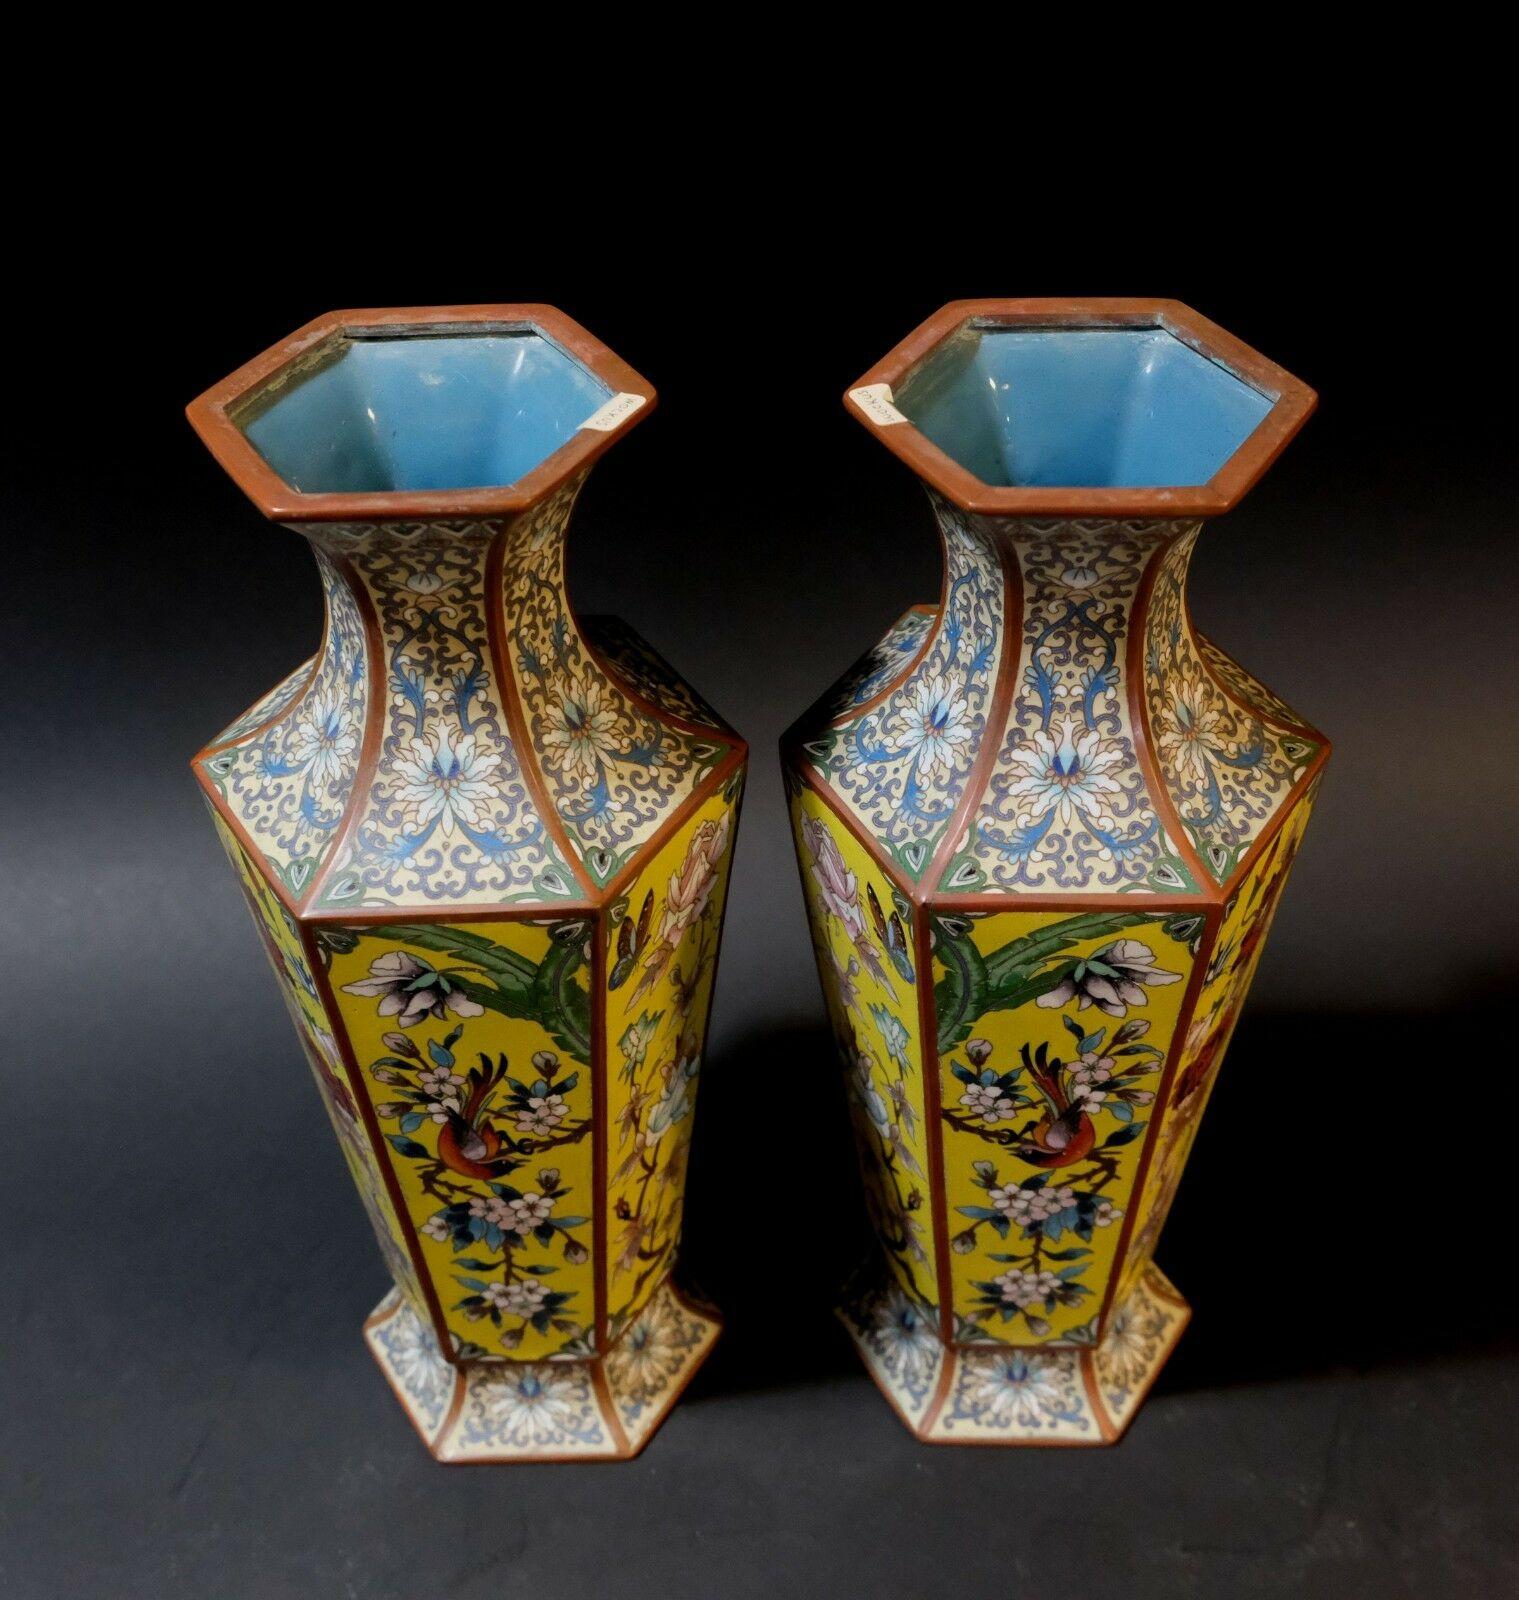 Matching Pair of French Victorian Cloisonné Vases. 19th Century, Victorian period, France origin. Chinoiseries Blue enamel on porcelain with bird foliage and butterflies. Hexagon shape. Great condition. 